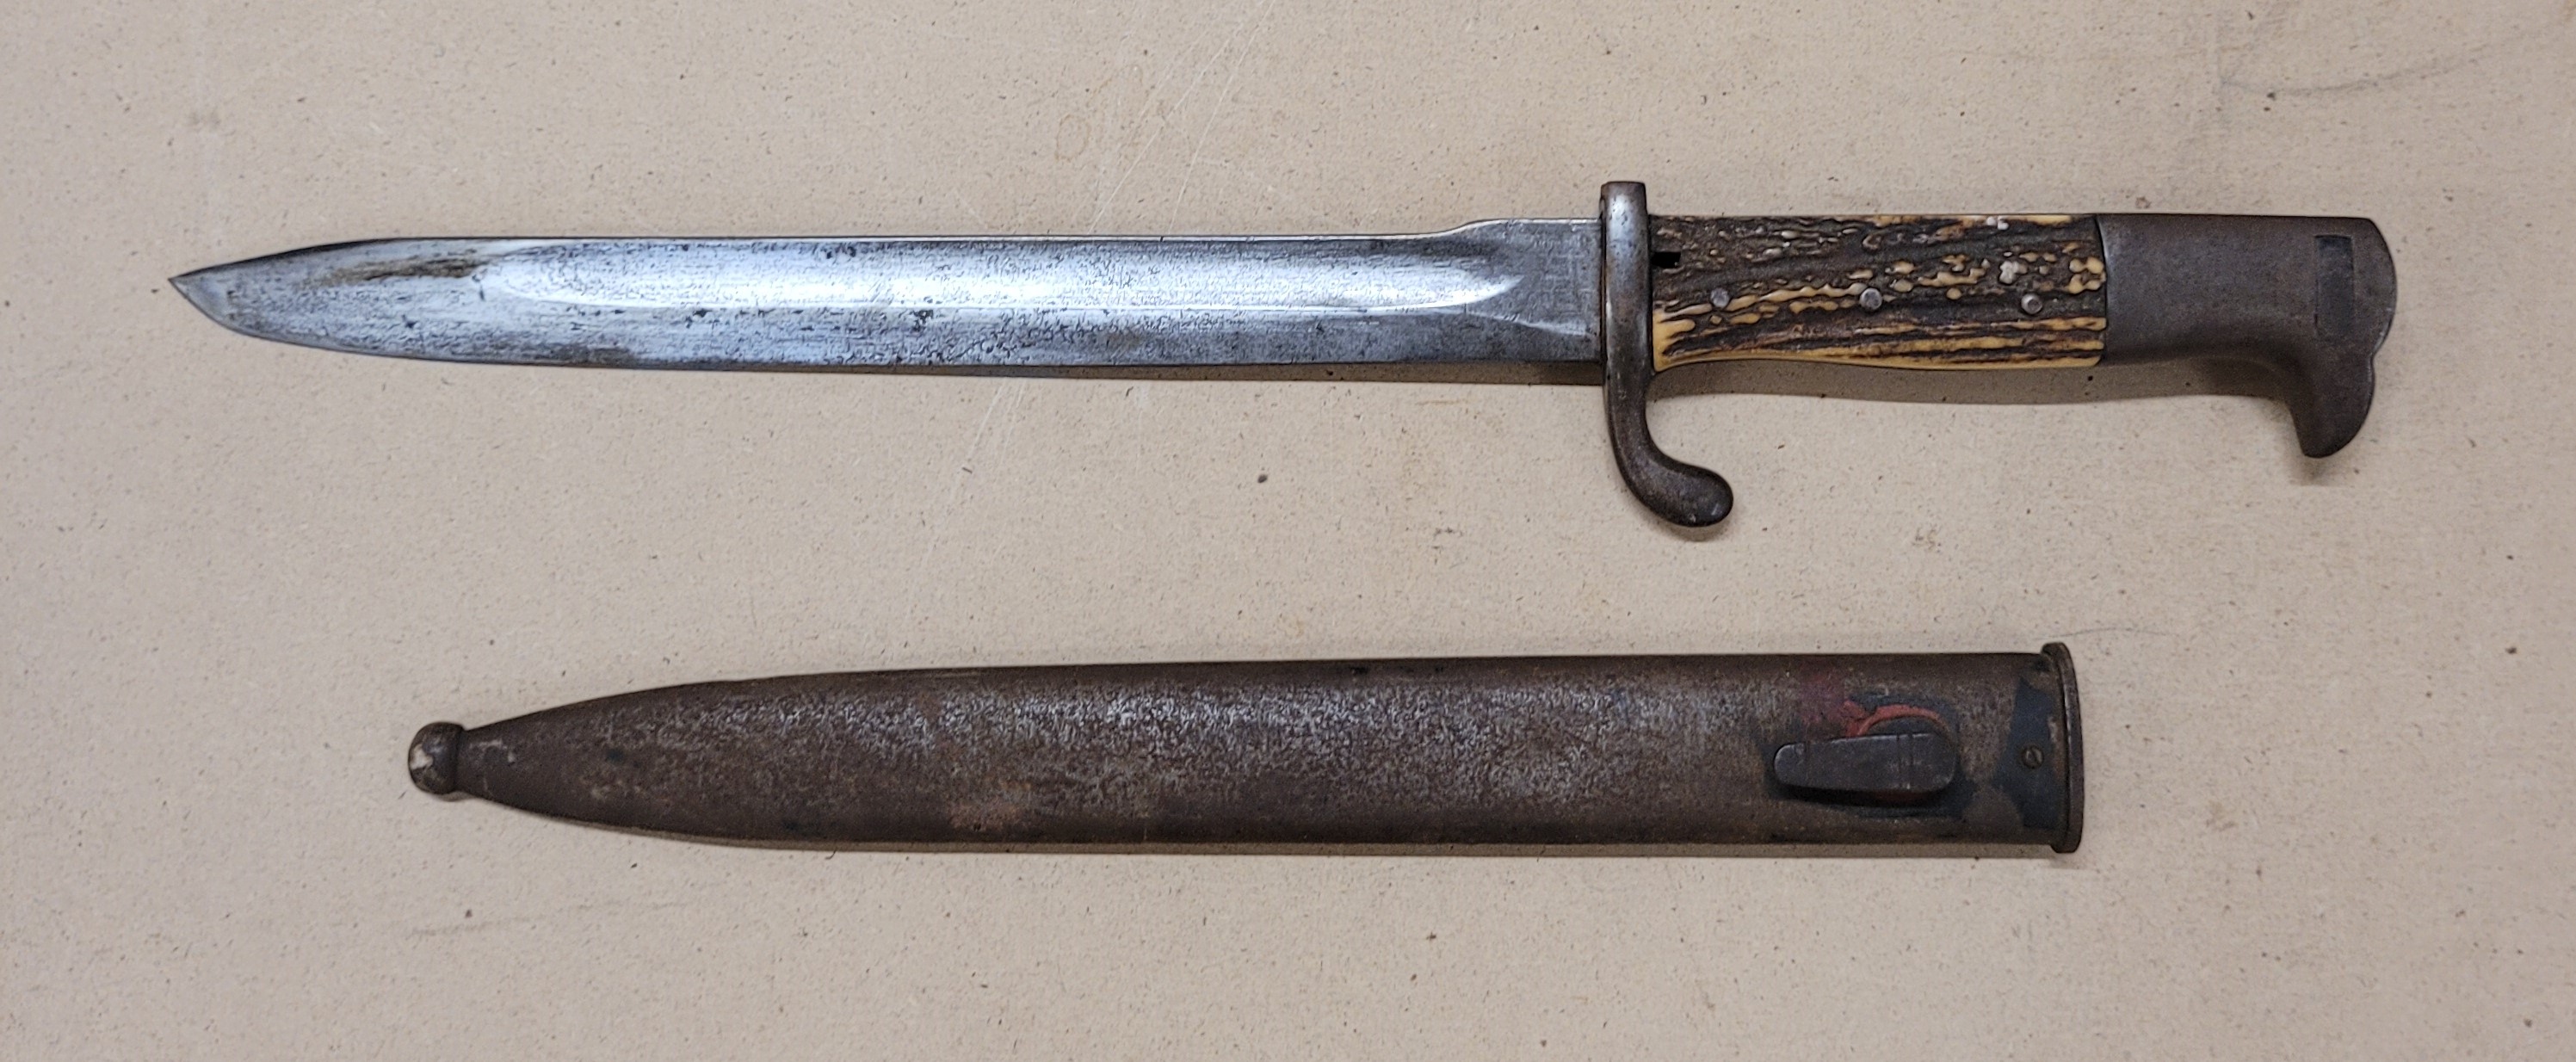 A bayonet with antler handle and scabbard